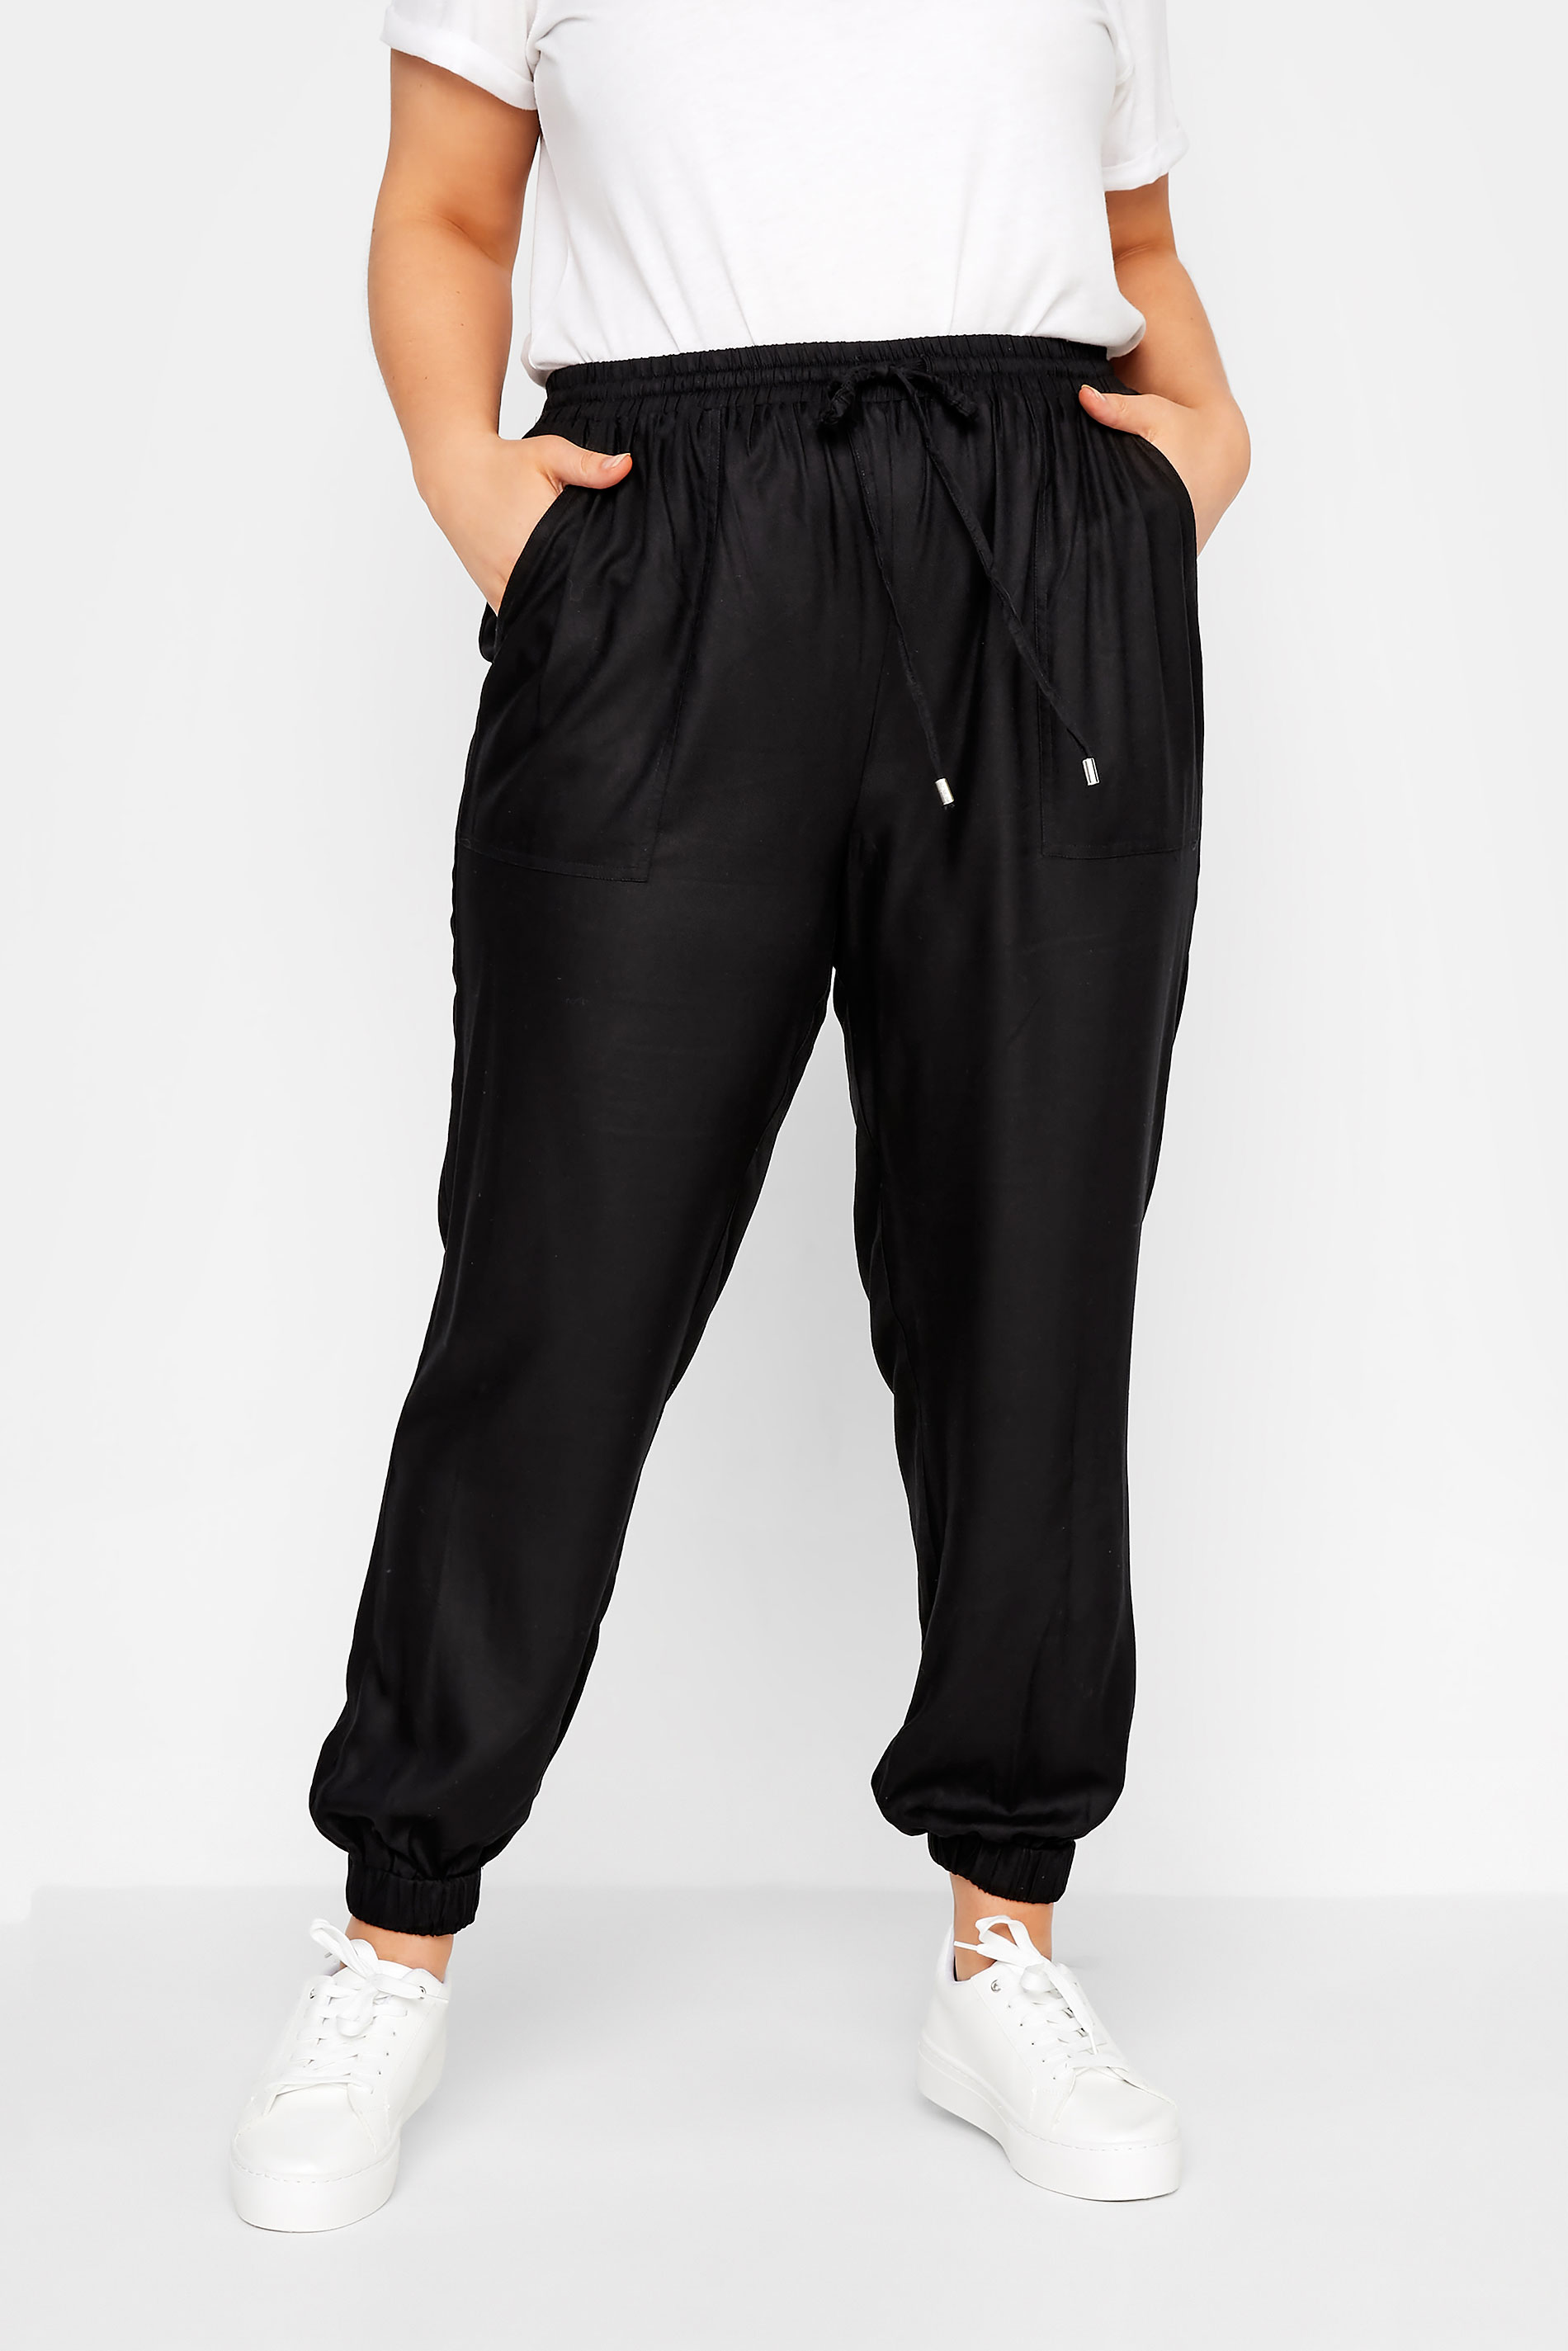 Plus Size Black Cuffed Joggers | Yours Clothing 1